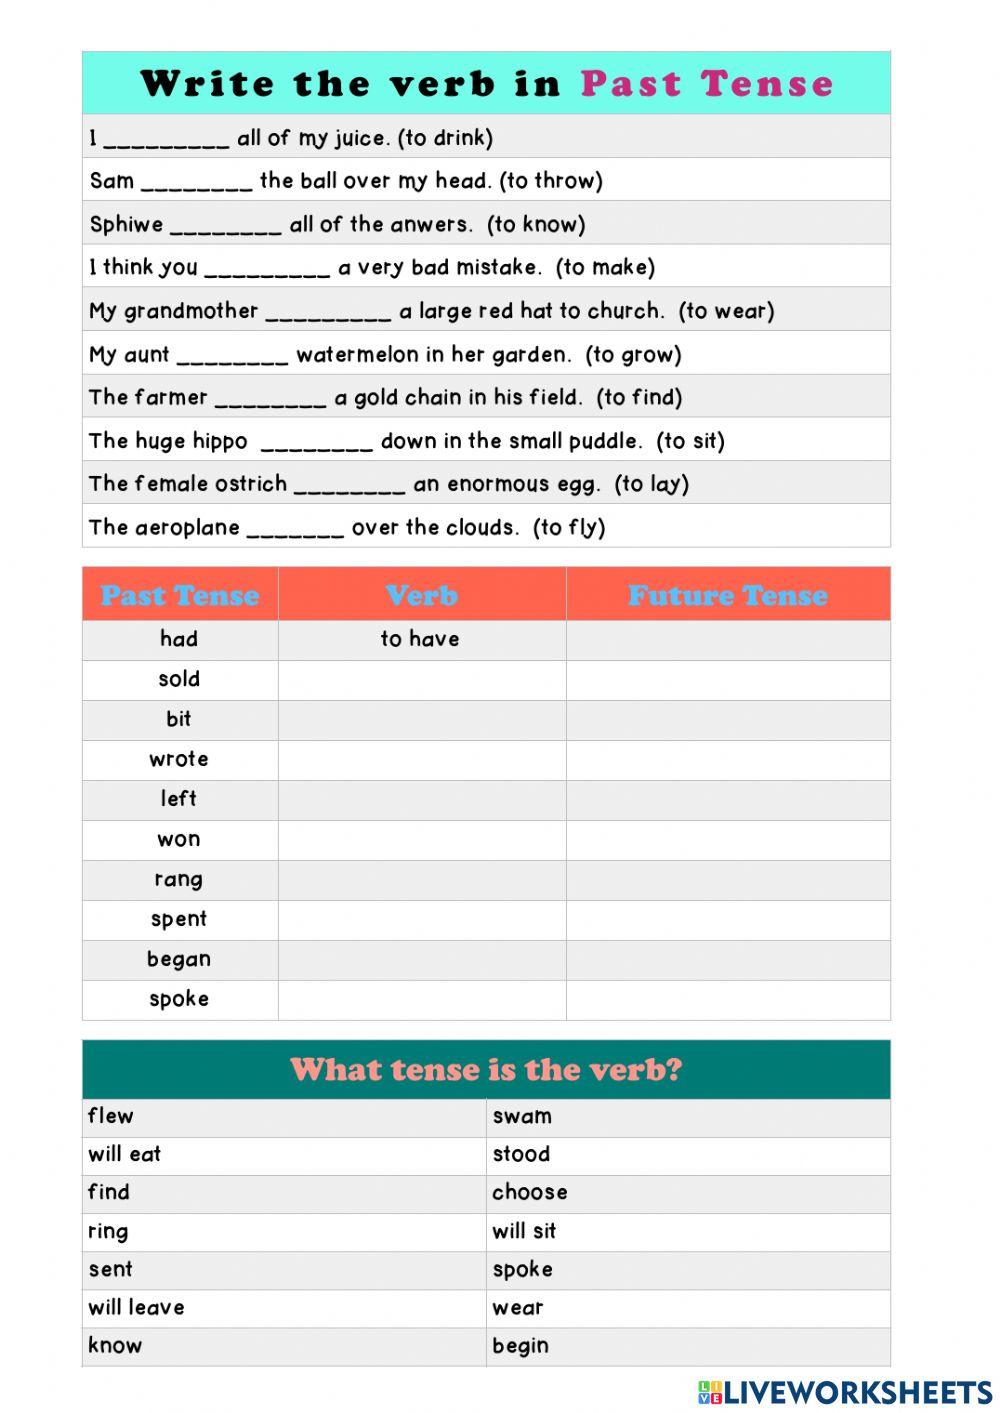 Let's Practice our Verbs